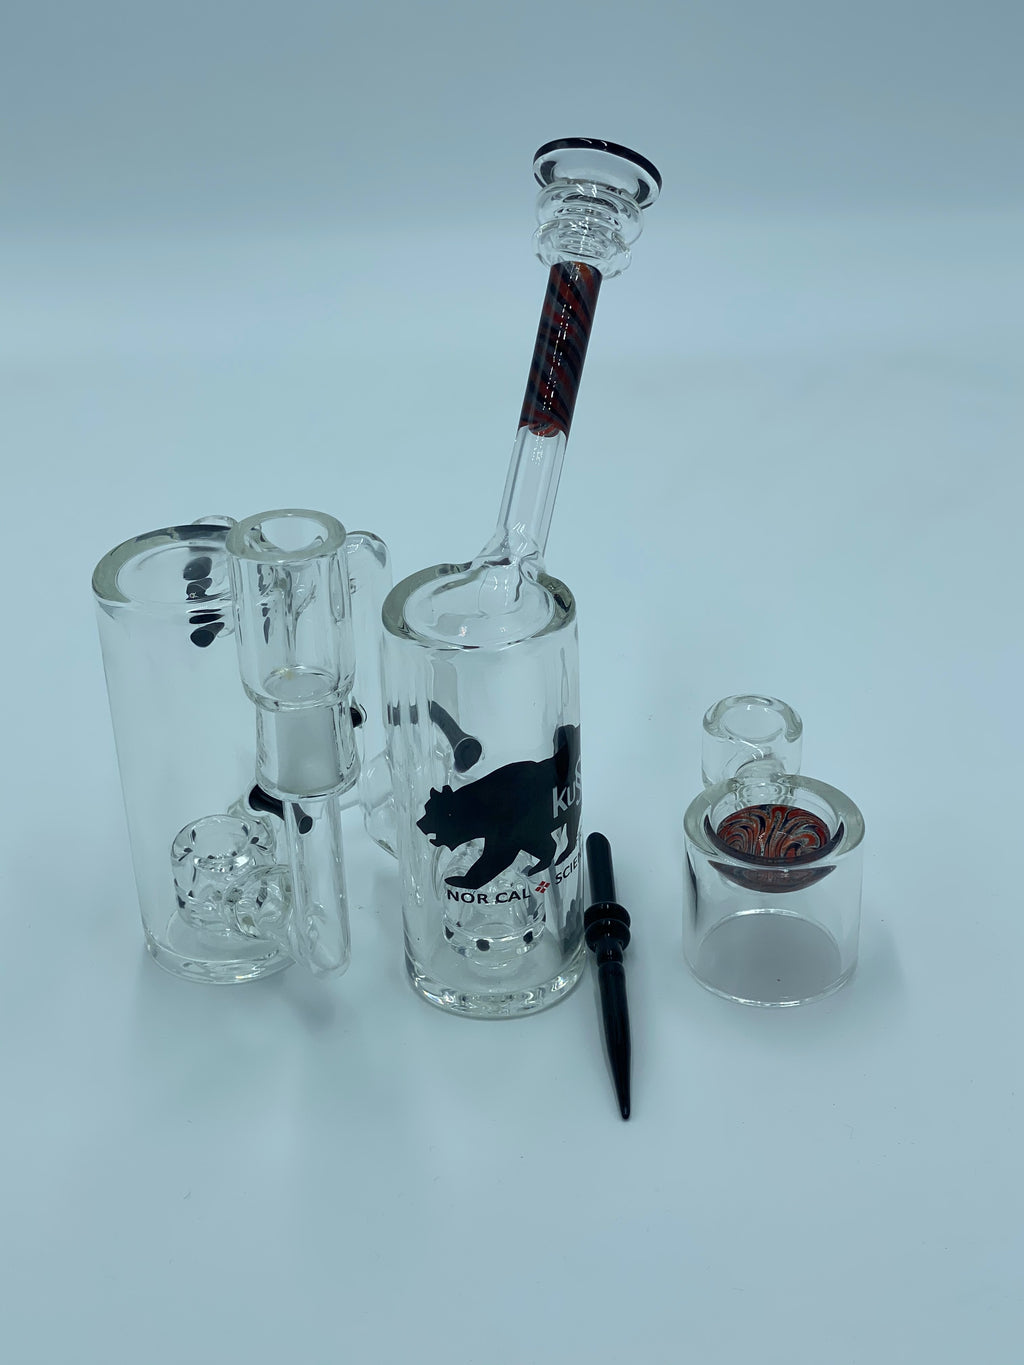 KUSH SCIENTIFIC DAB STATION - Smoke Country - Land of the artistic glass blown bongs